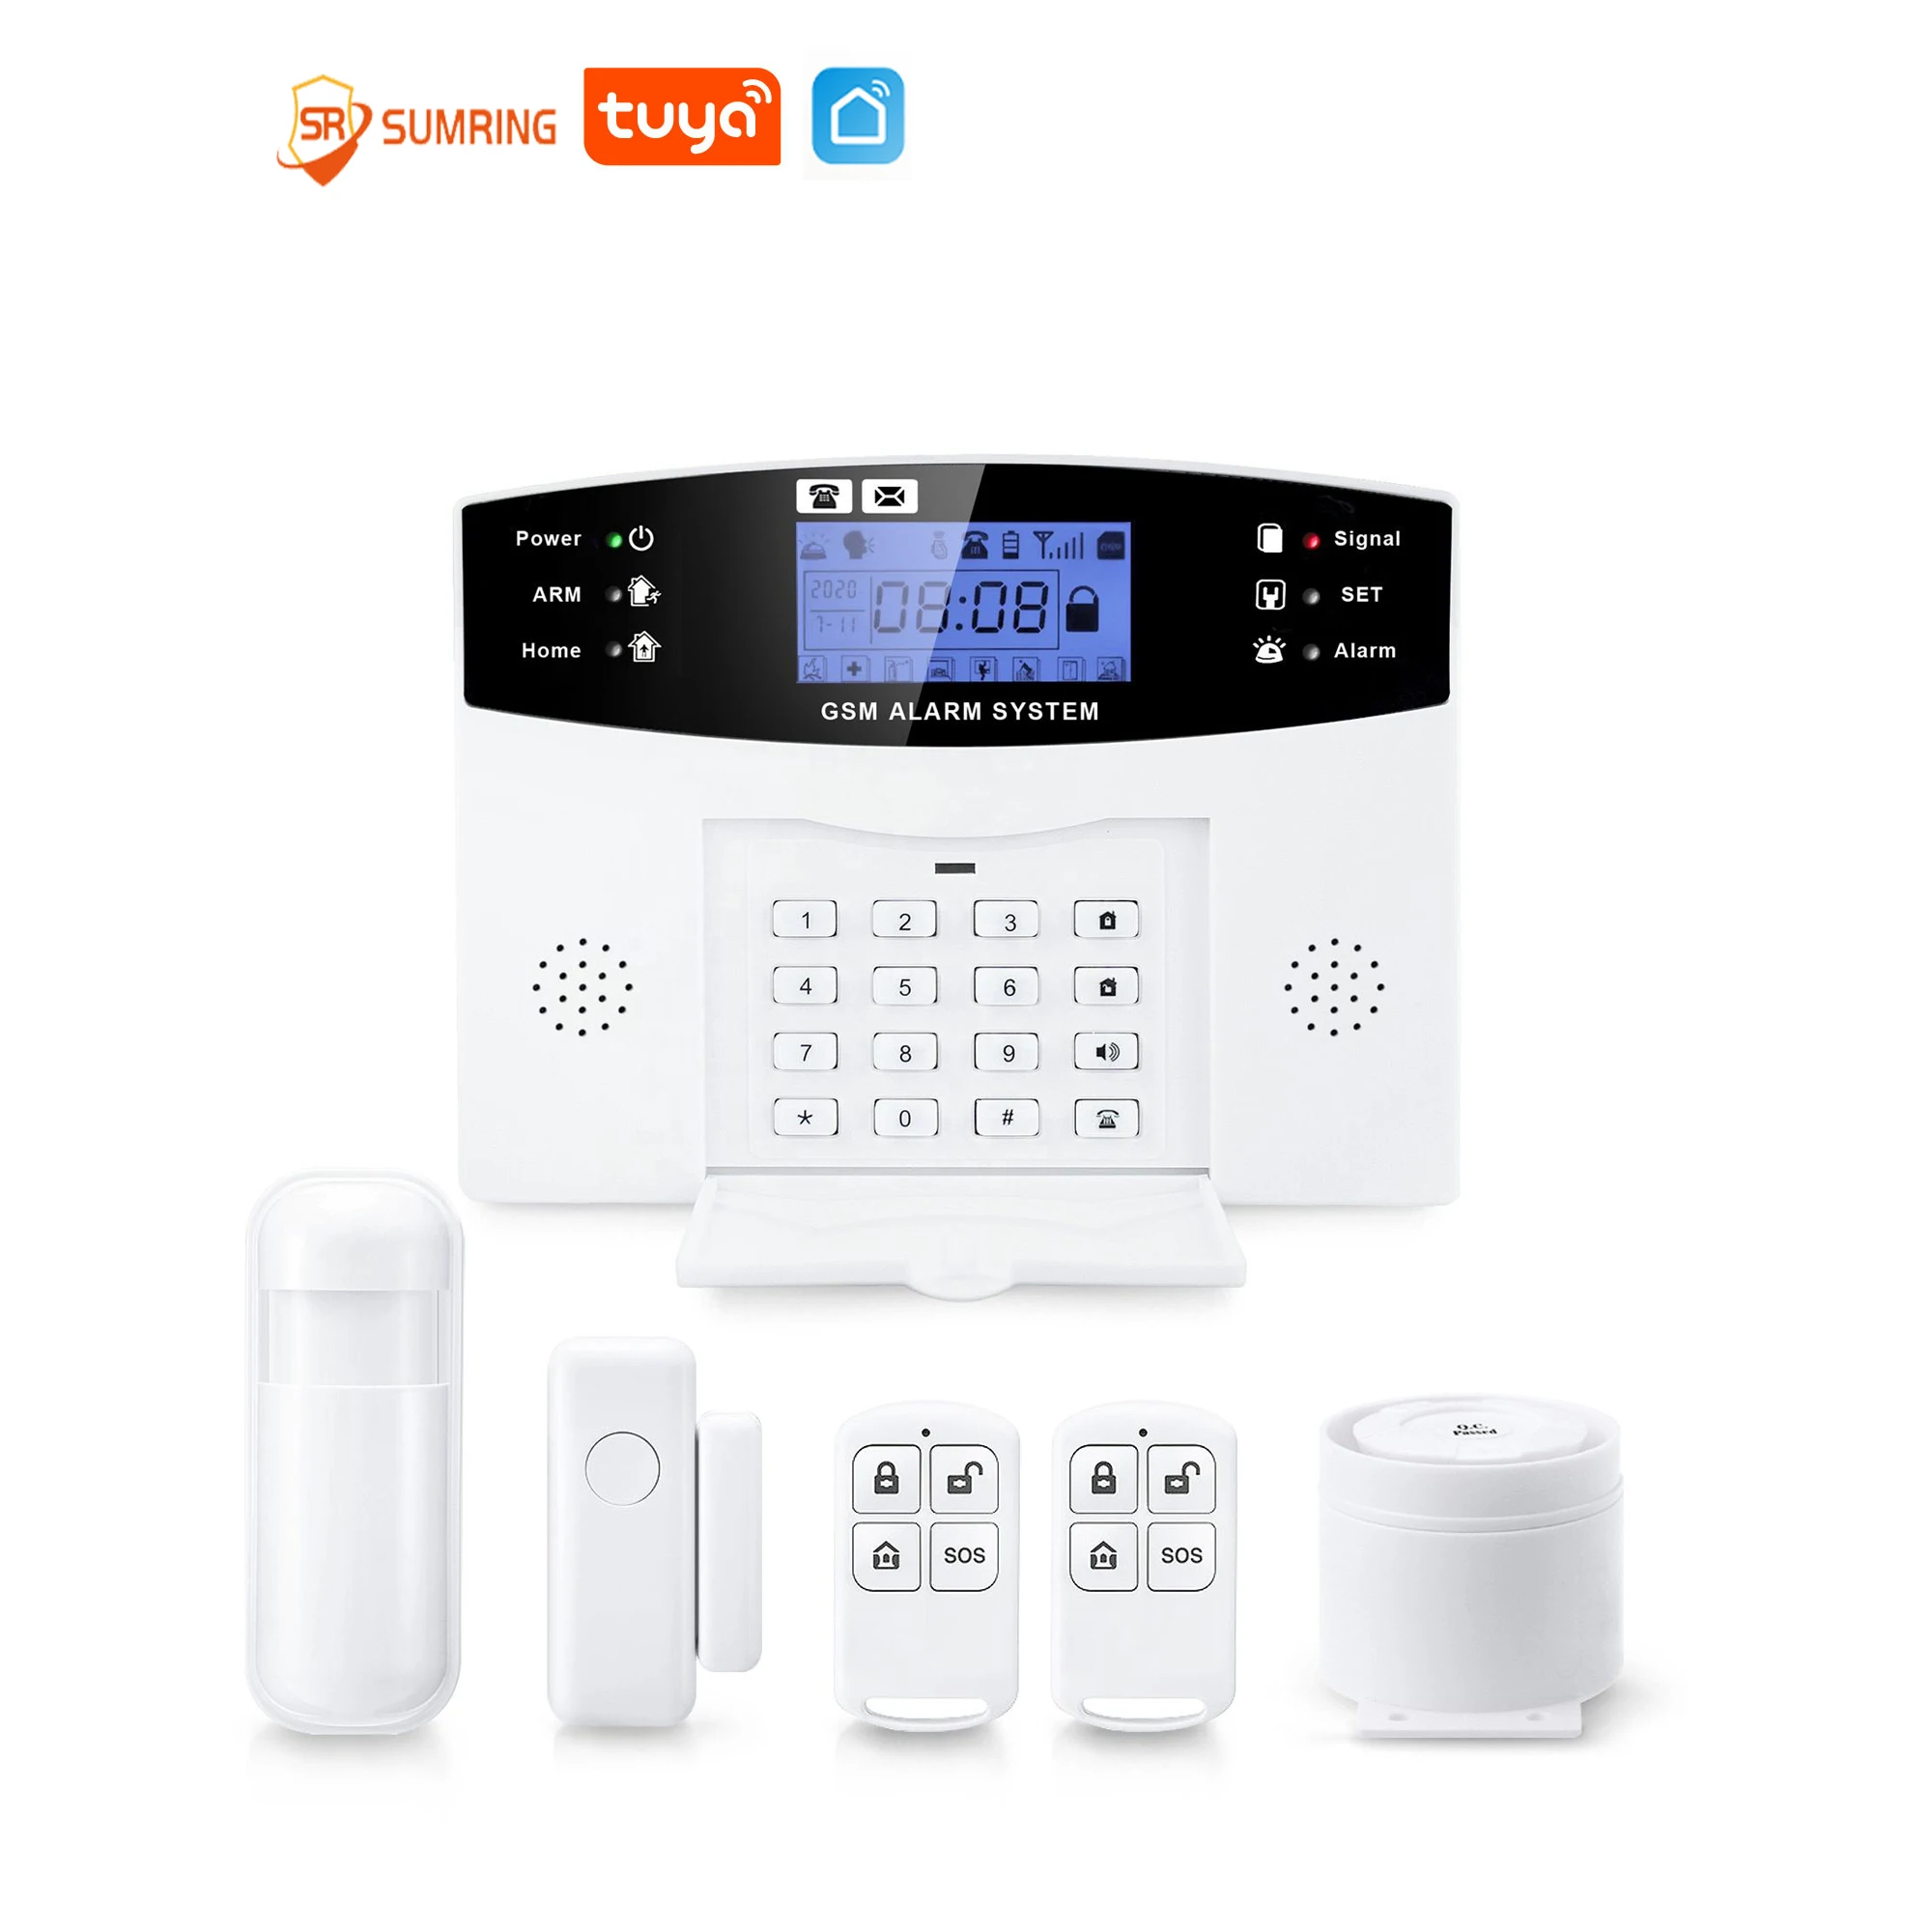 real-time-monitoring-control-home-security-remote-protection-gsm-wifi-wireless-home-burglar-security-alarm-system